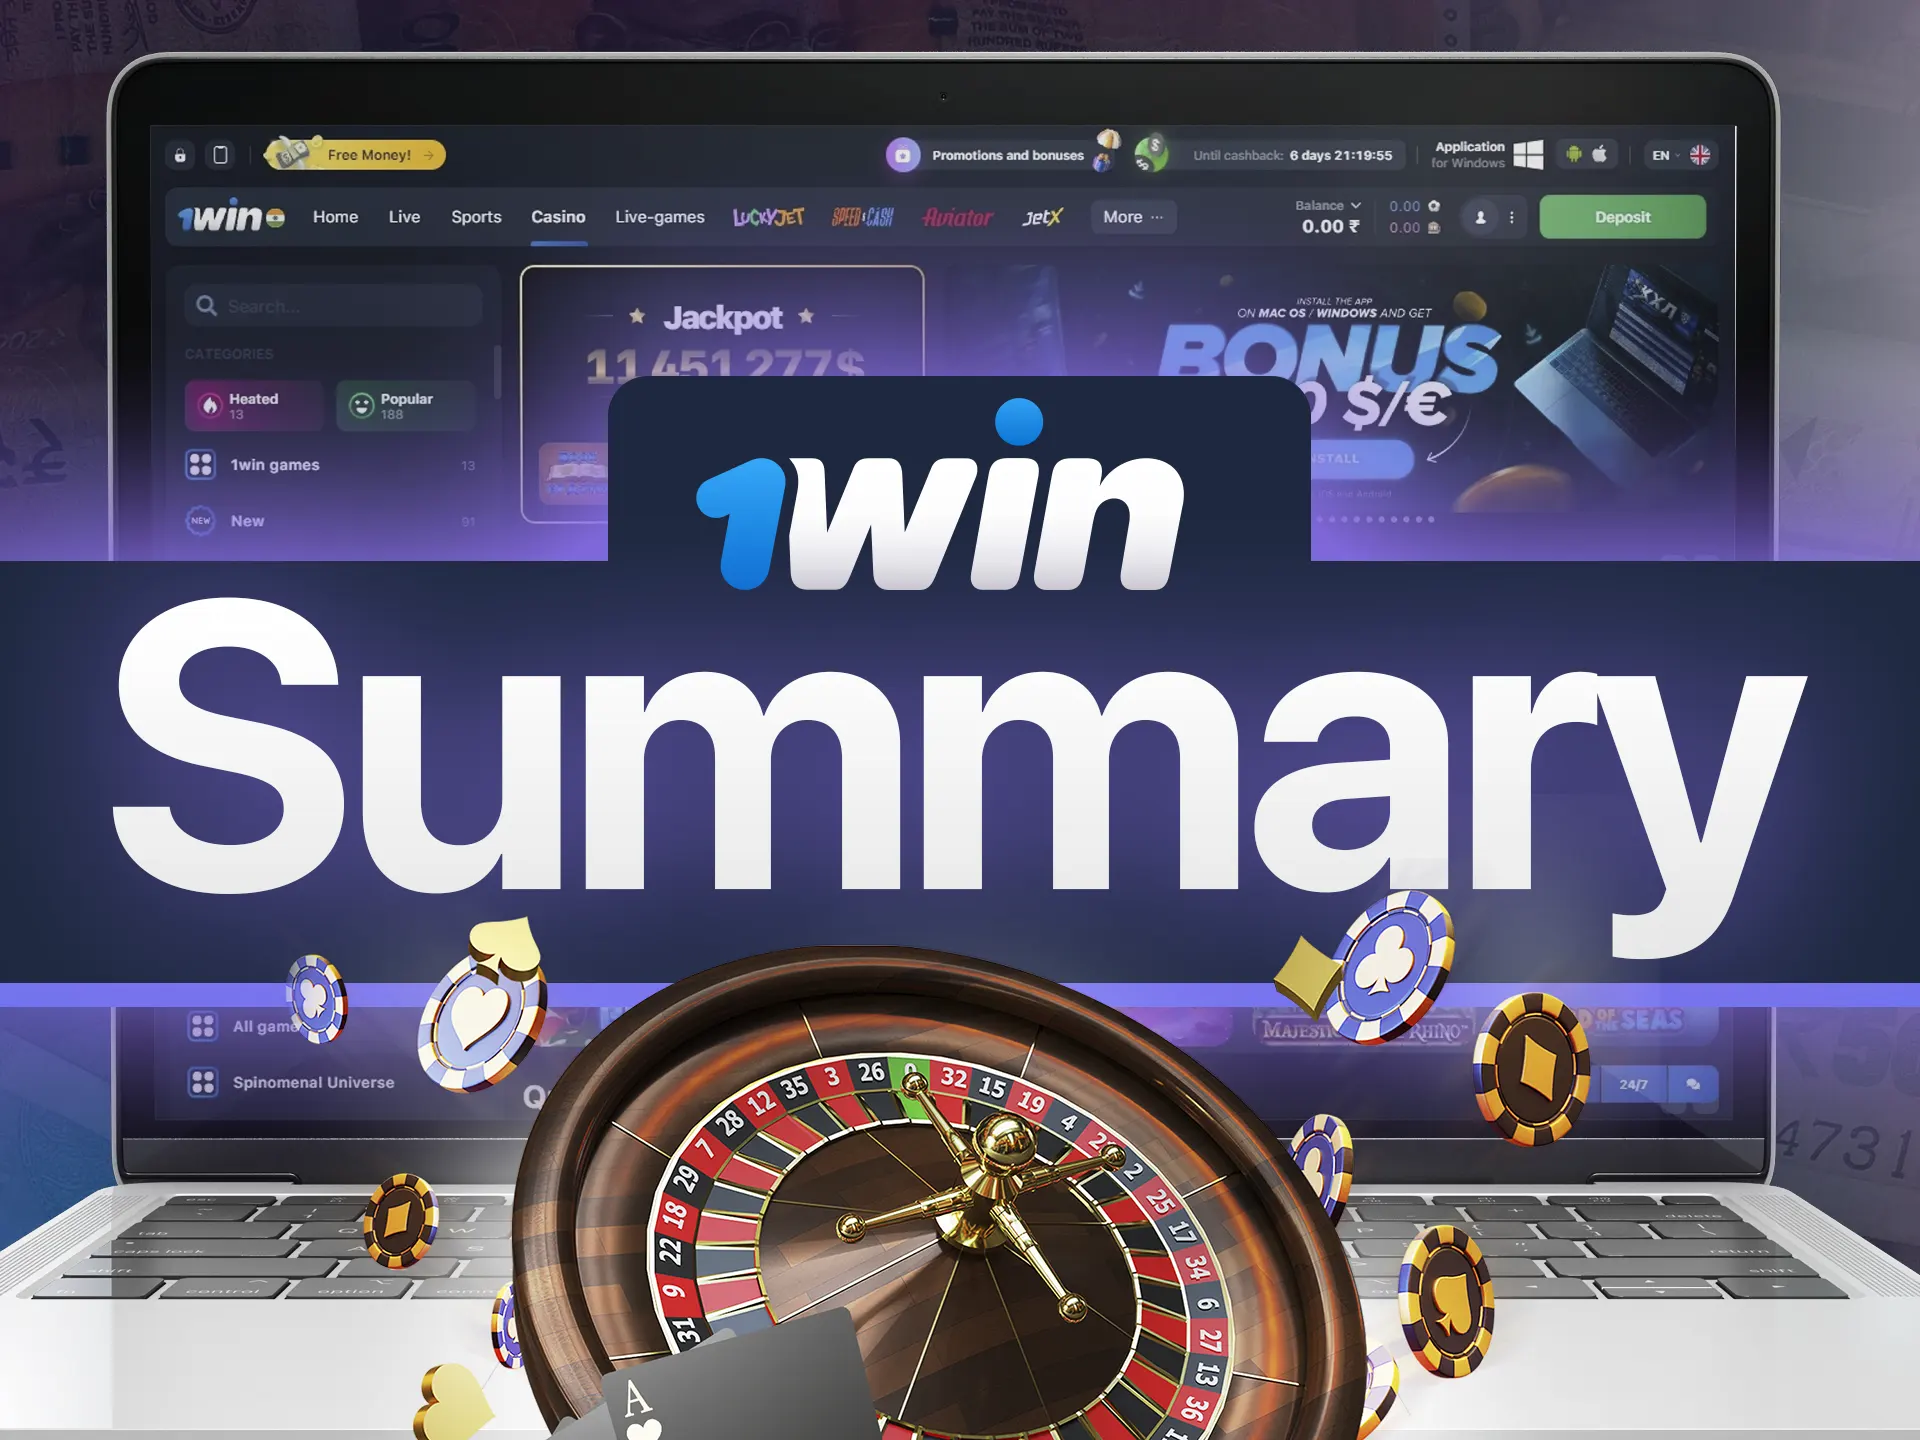 1win online casino offers a wide range of games that are unparalleled in the online gambling arena.